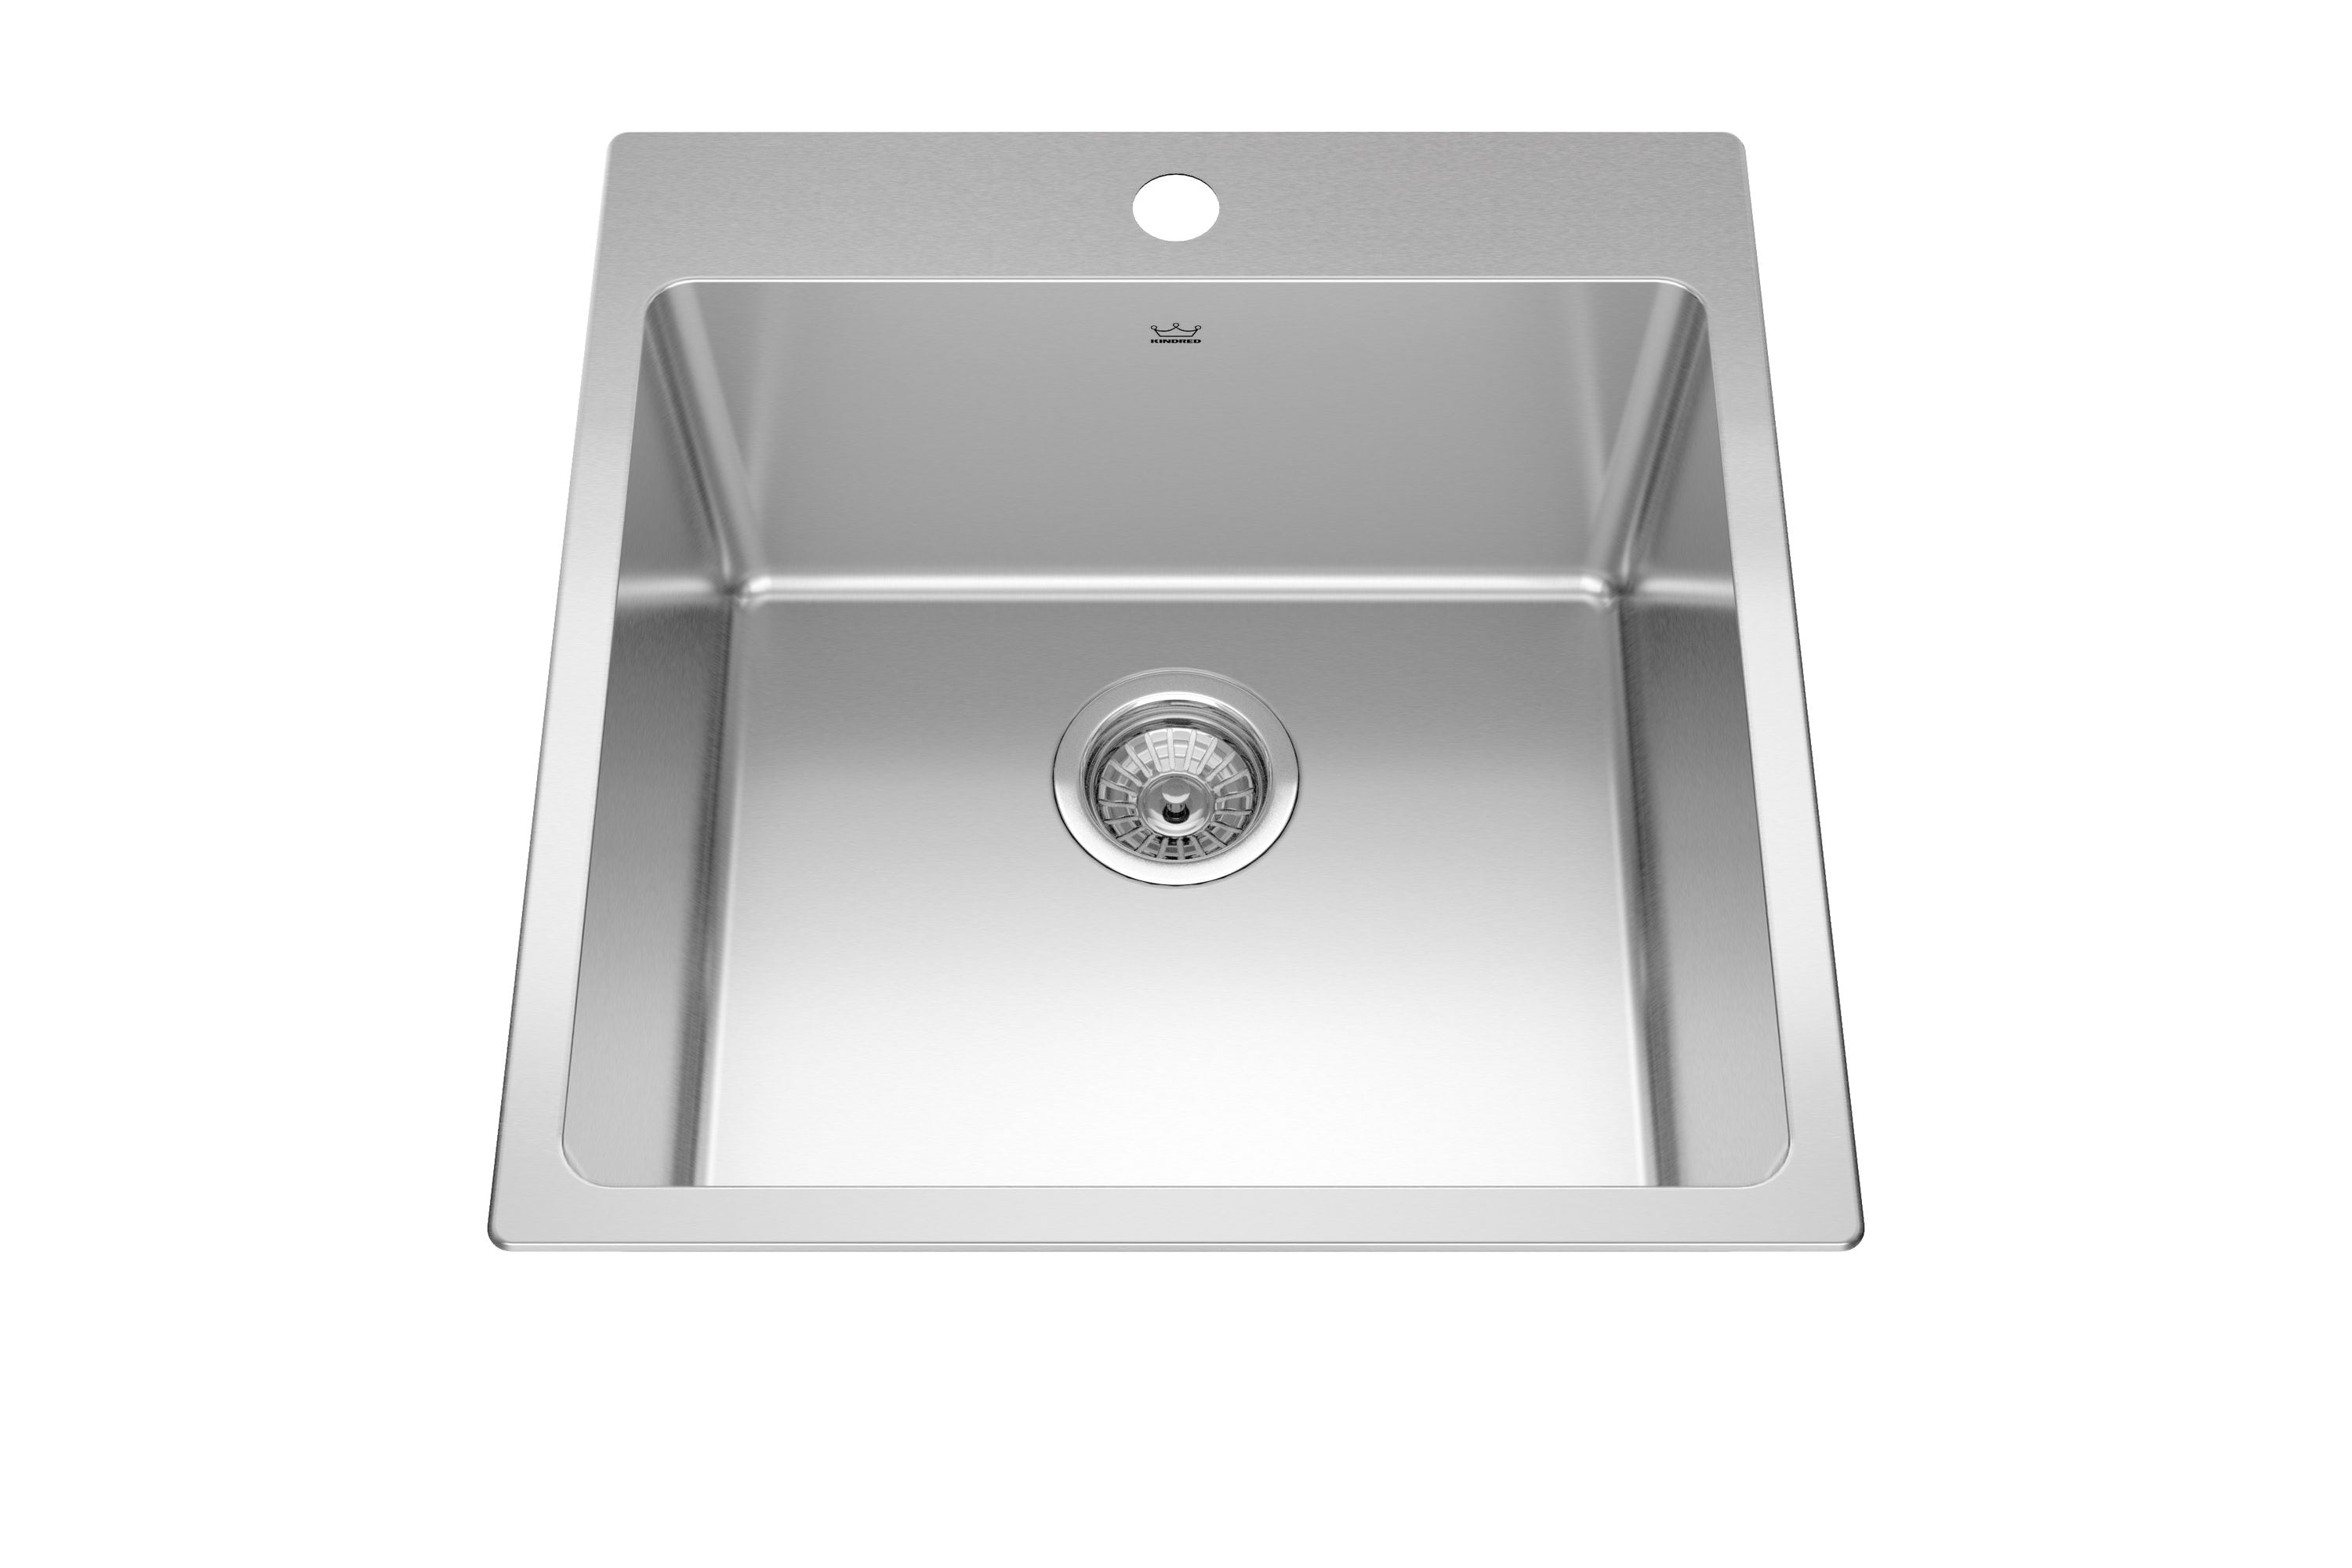 kindred 24 inch stainless steel kitchen sink